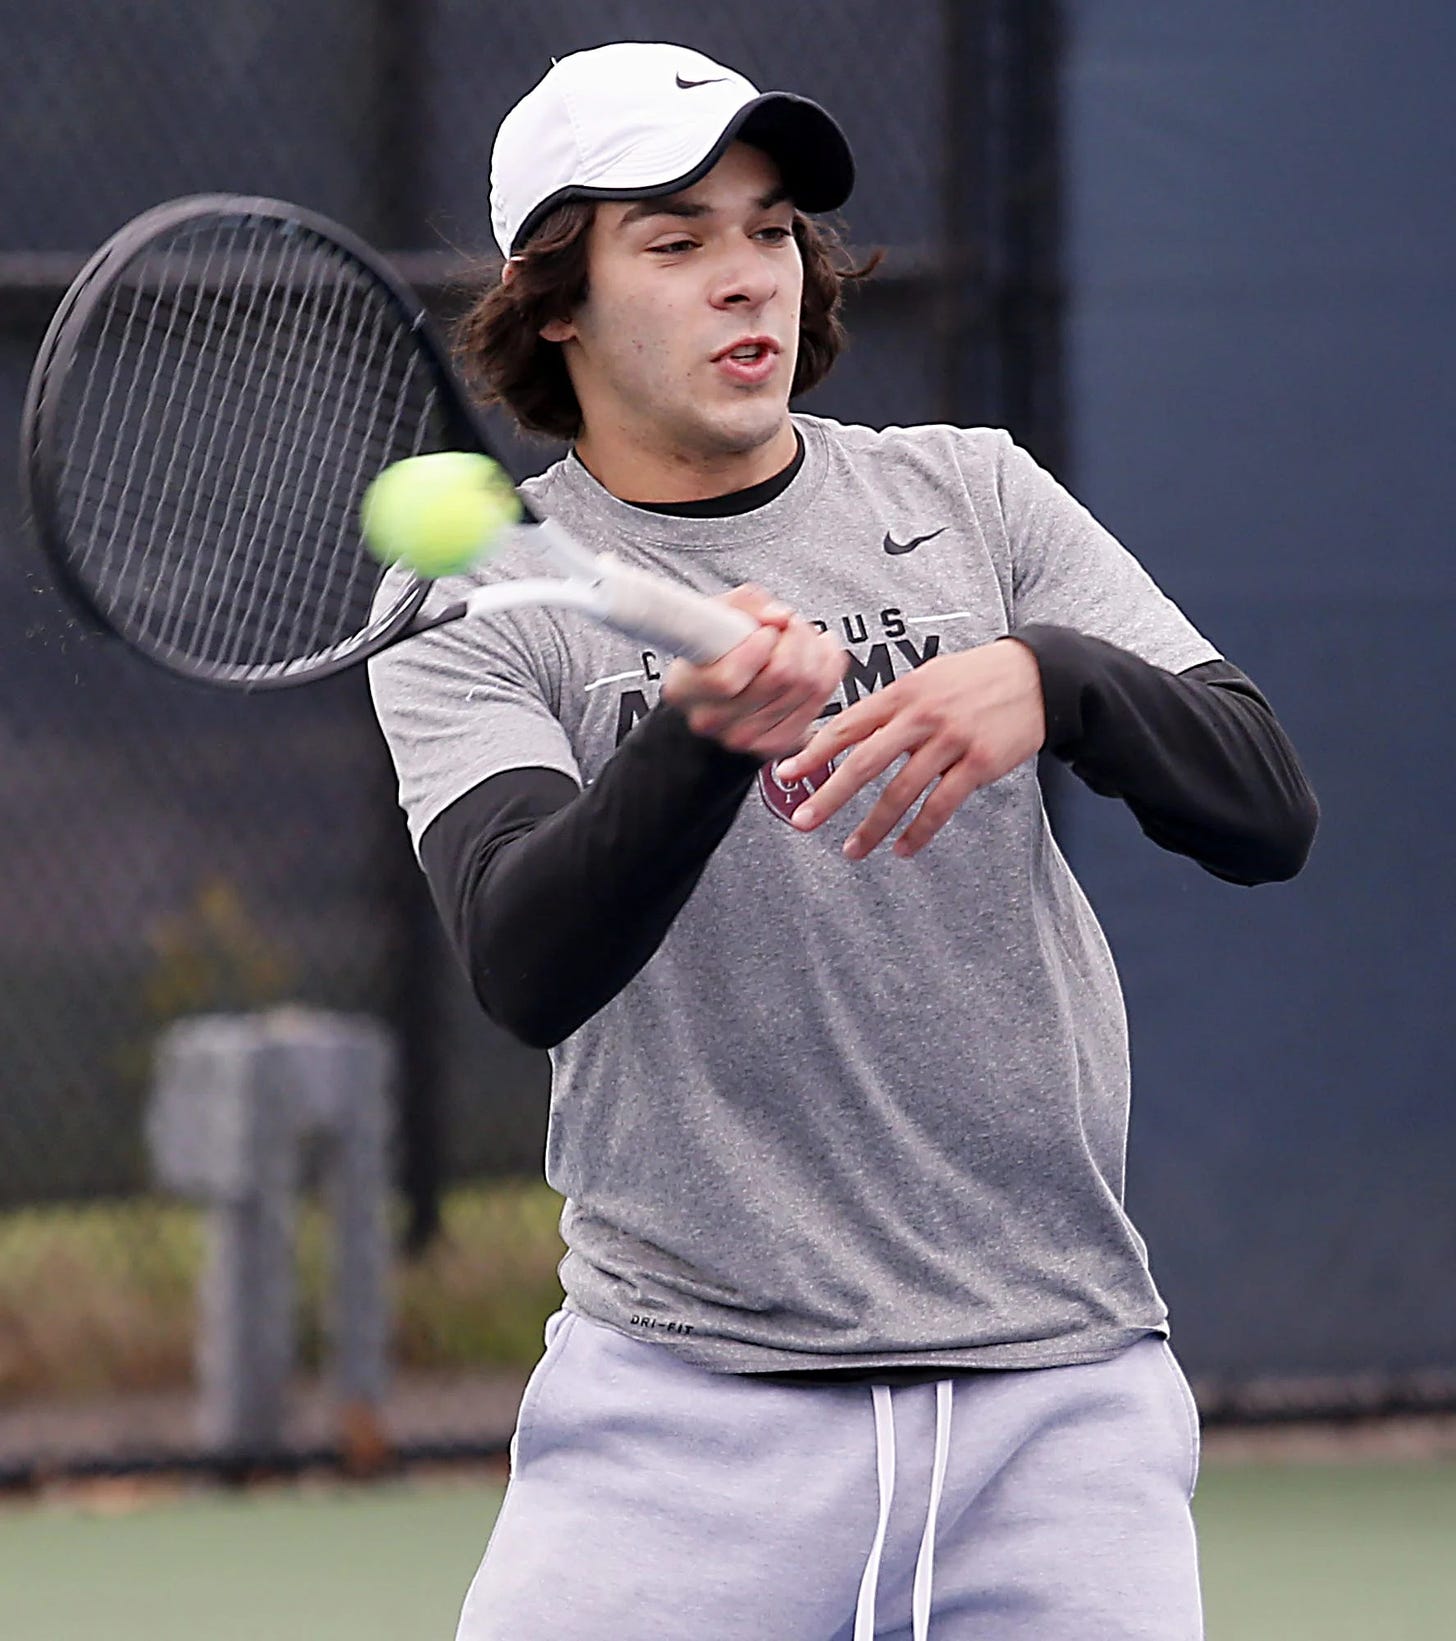 Jack Madison competes for Columbus Academy in the Division II state tournament in 2021 at Lindner Family Tennis Center in Mason. Madison, who was from Bexley, died in his sleep Jan. 2. He was a sophomore tennis player at Colorado College.